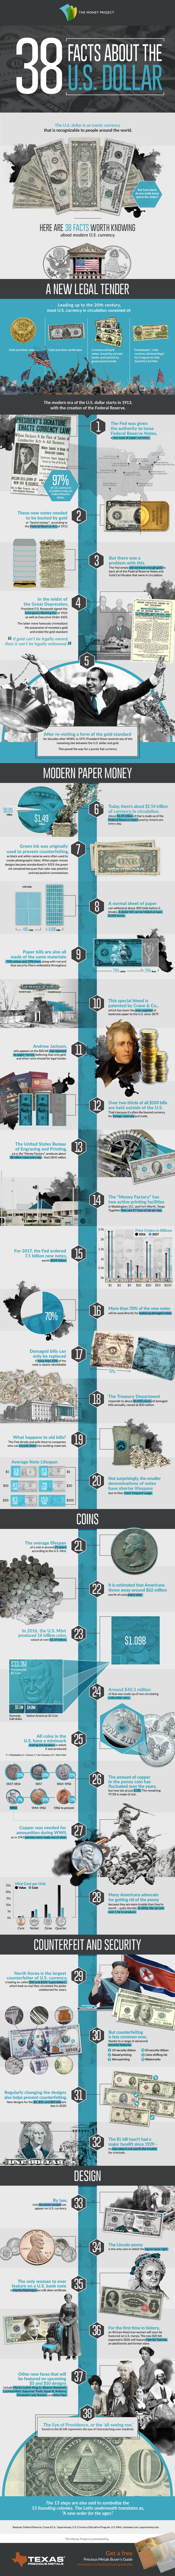 38 Incredible Facts on the Modern U.S. Dollar